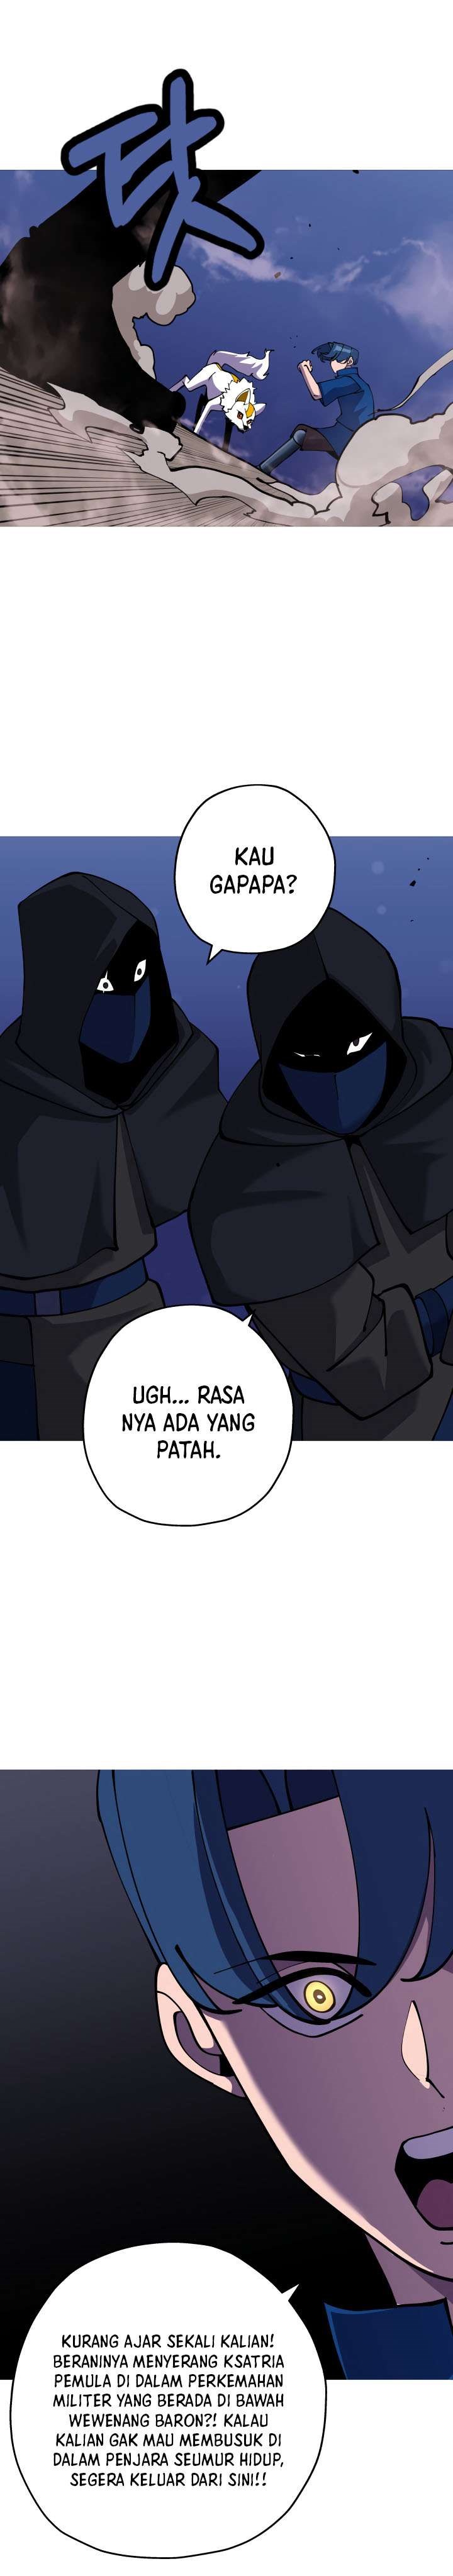 Dilarang COPAS - situs resmi www.mangacanblog.com - Komik the story of a low rank soldier becoming a monarch 026 - chapter 26 27 Indonesia the story of a low rank soldier becoming a monarch 026 - chapter 26 Terbaru 27|Baca Manga Komik Indonesia|Mangacan